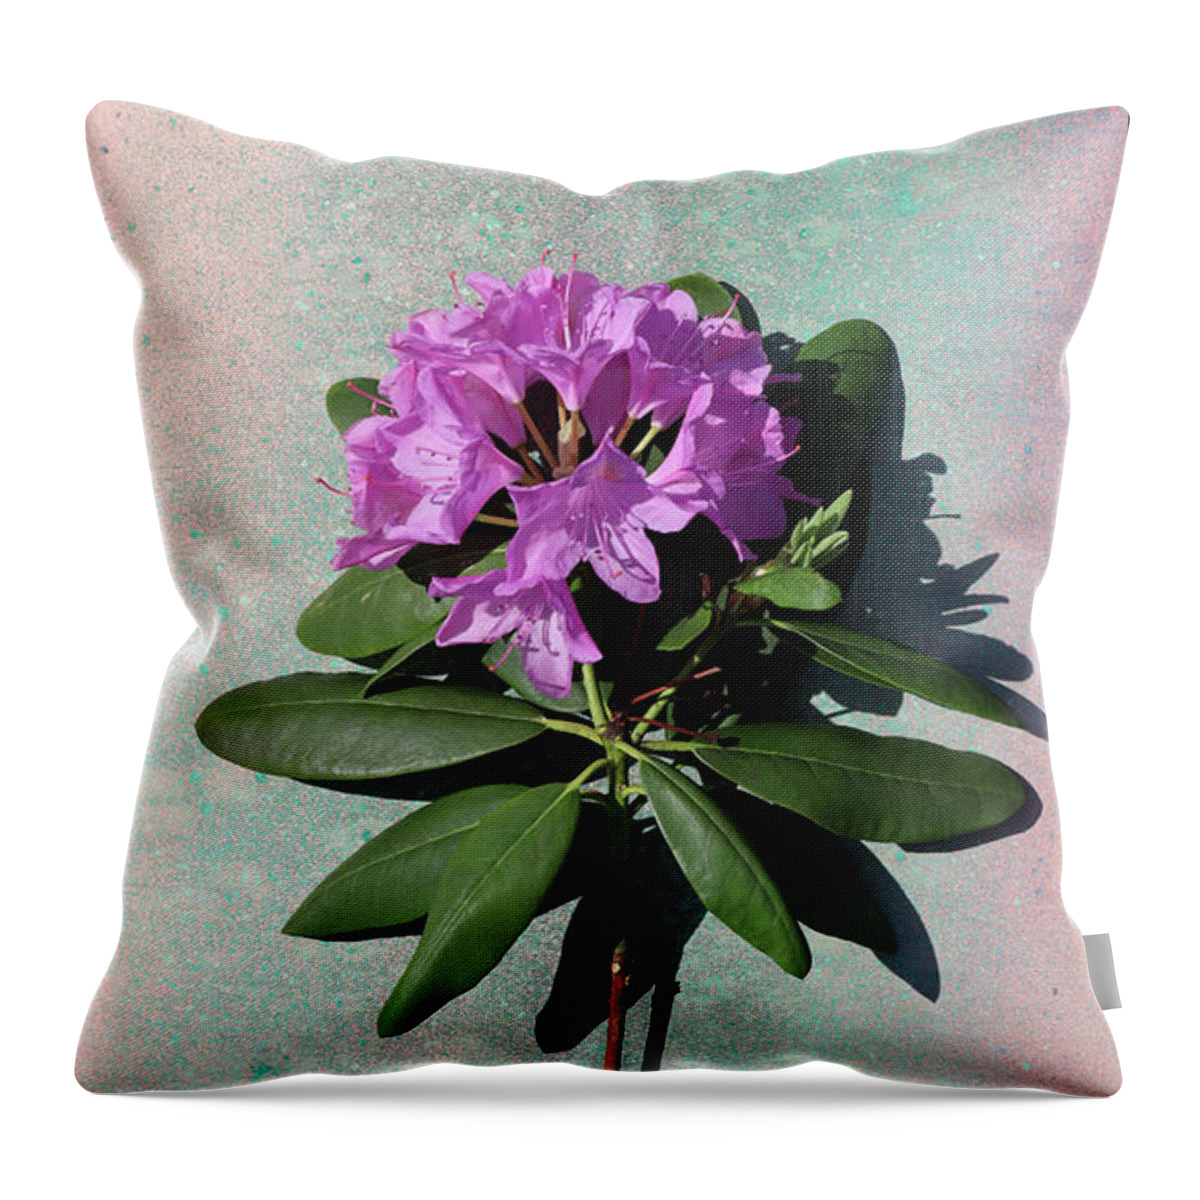 Rhododendron Throw Pillow featuring the photograph Rhododendron by Paul Gaj